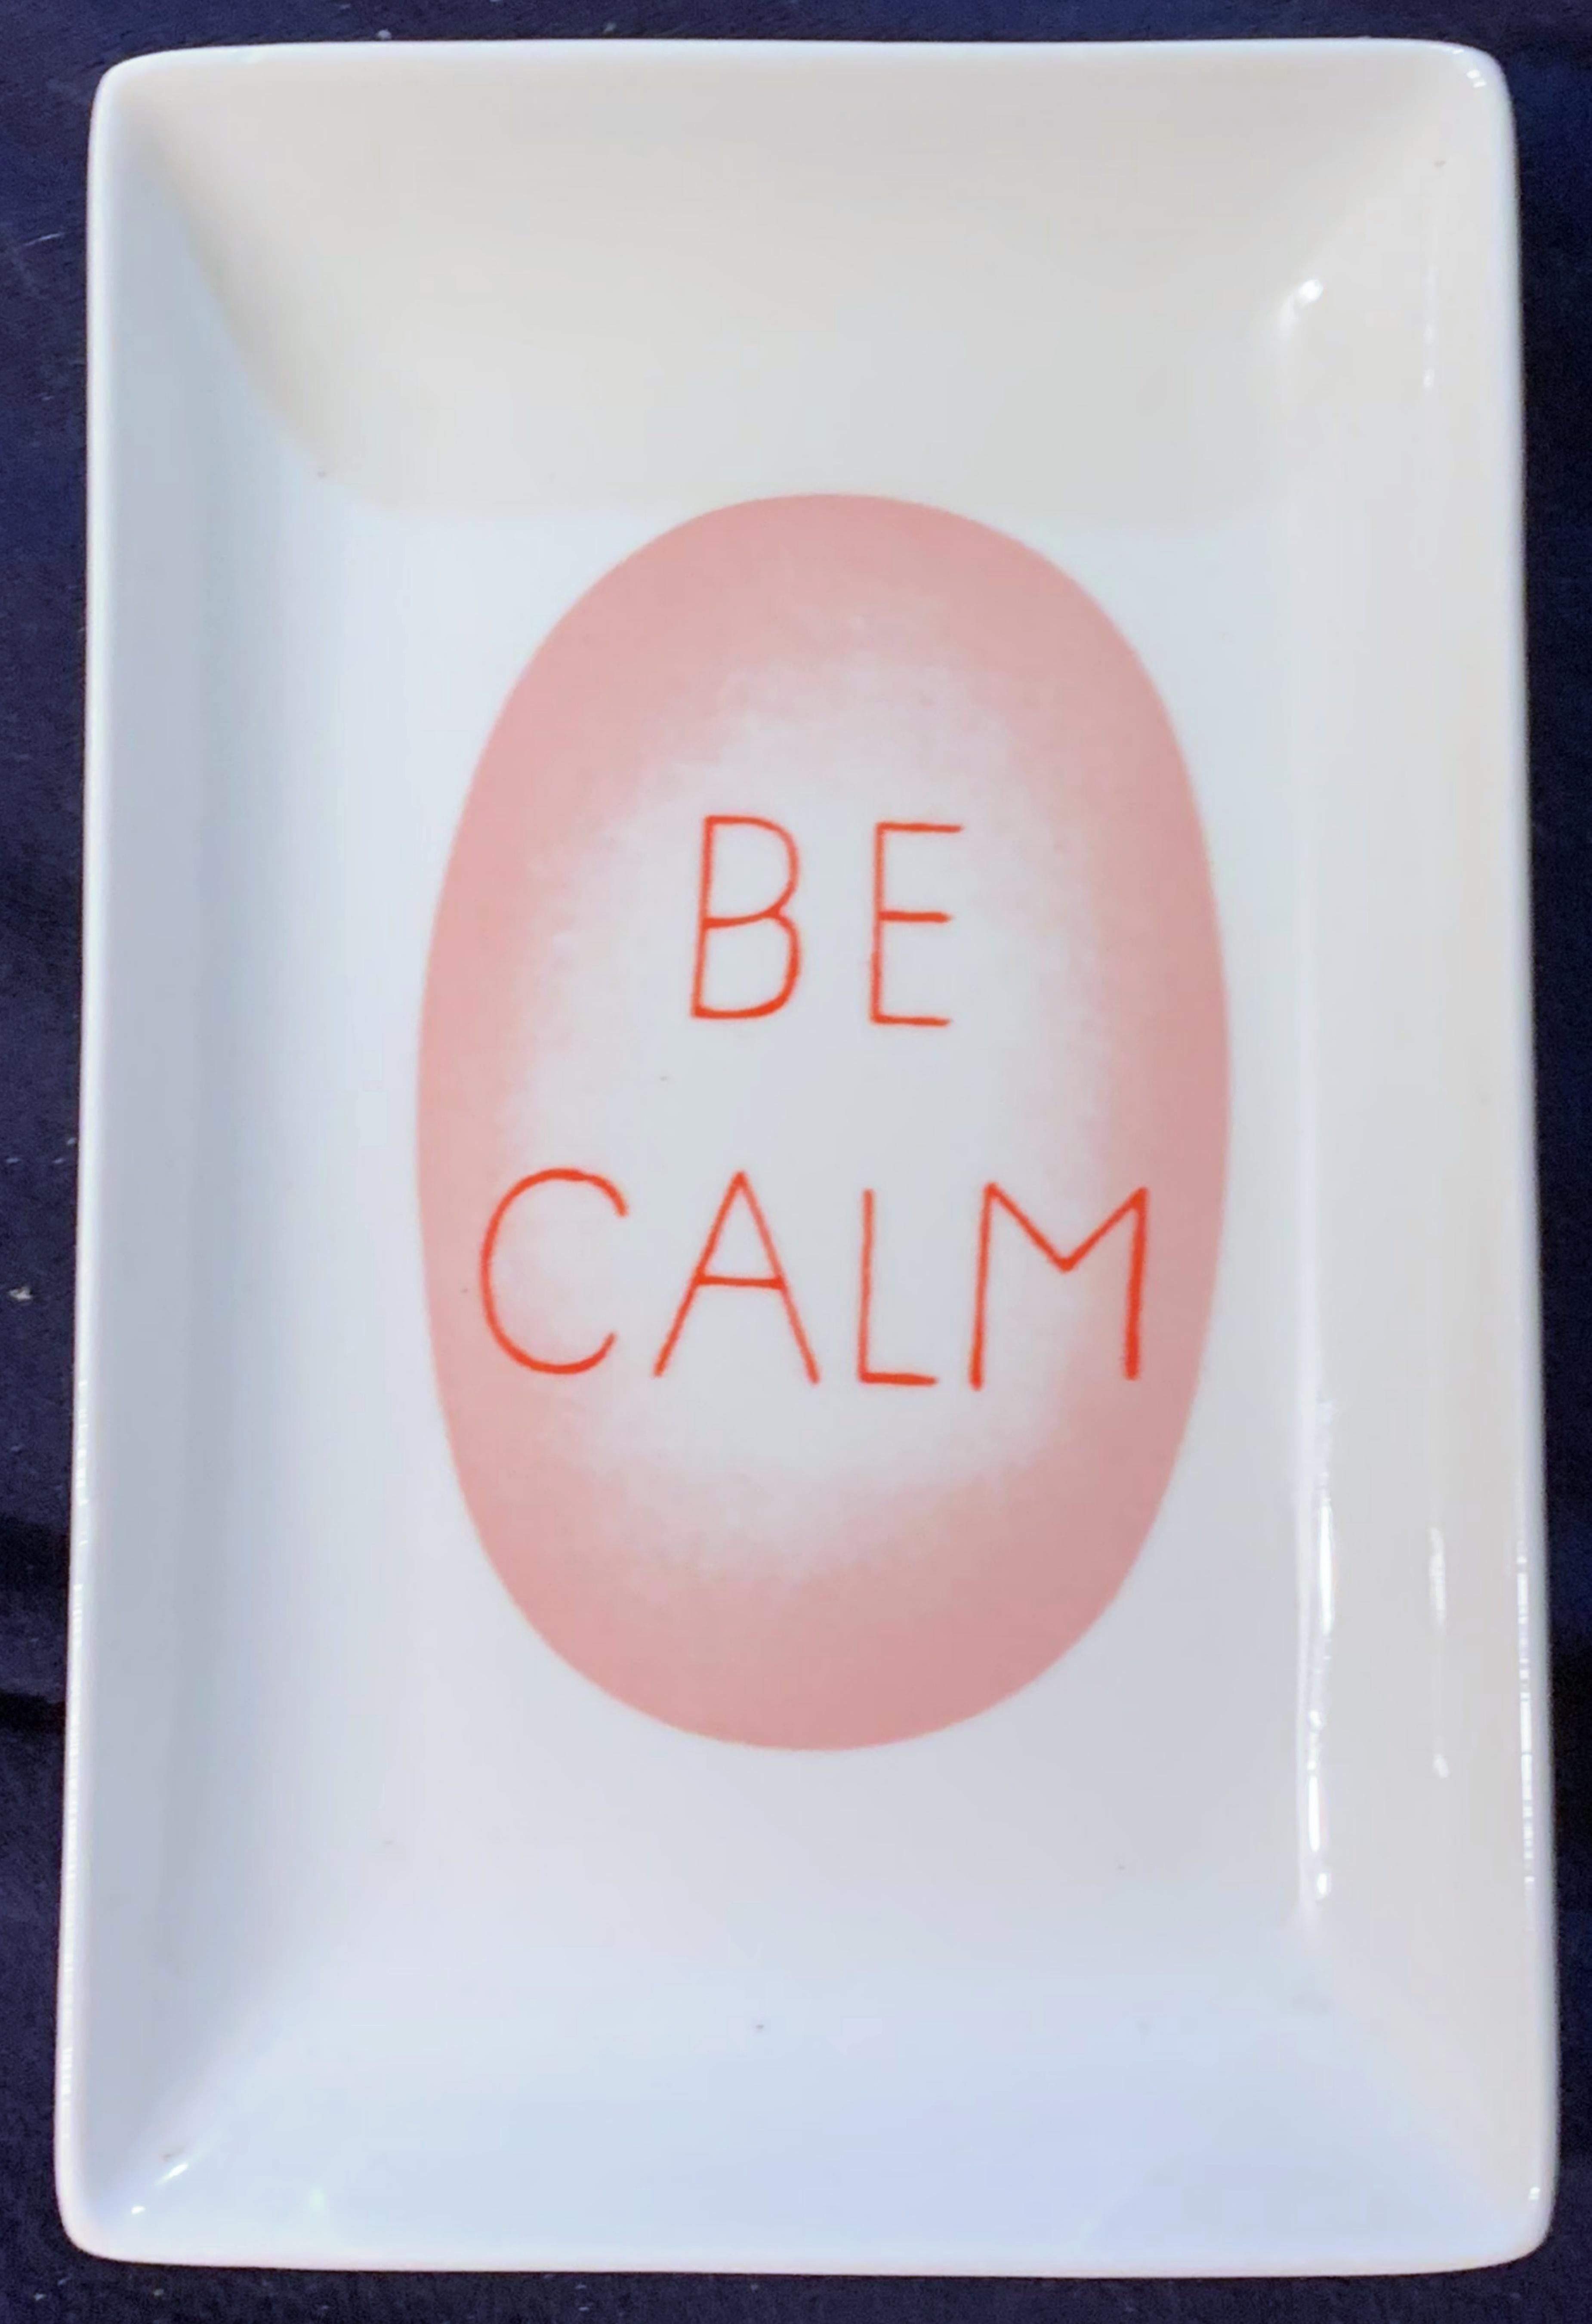 ATTENTION BUYERS: Try code FREESHIP at checkout for complimentary packing and shipping. (some exceptions apply)

Louise Bourgeois
Be Calm Butter or Trinket Dish for MOMA, 2017
Screenprint on Ceramic
6 × 4 × 1 inches
Unframed
Stamped by artist's